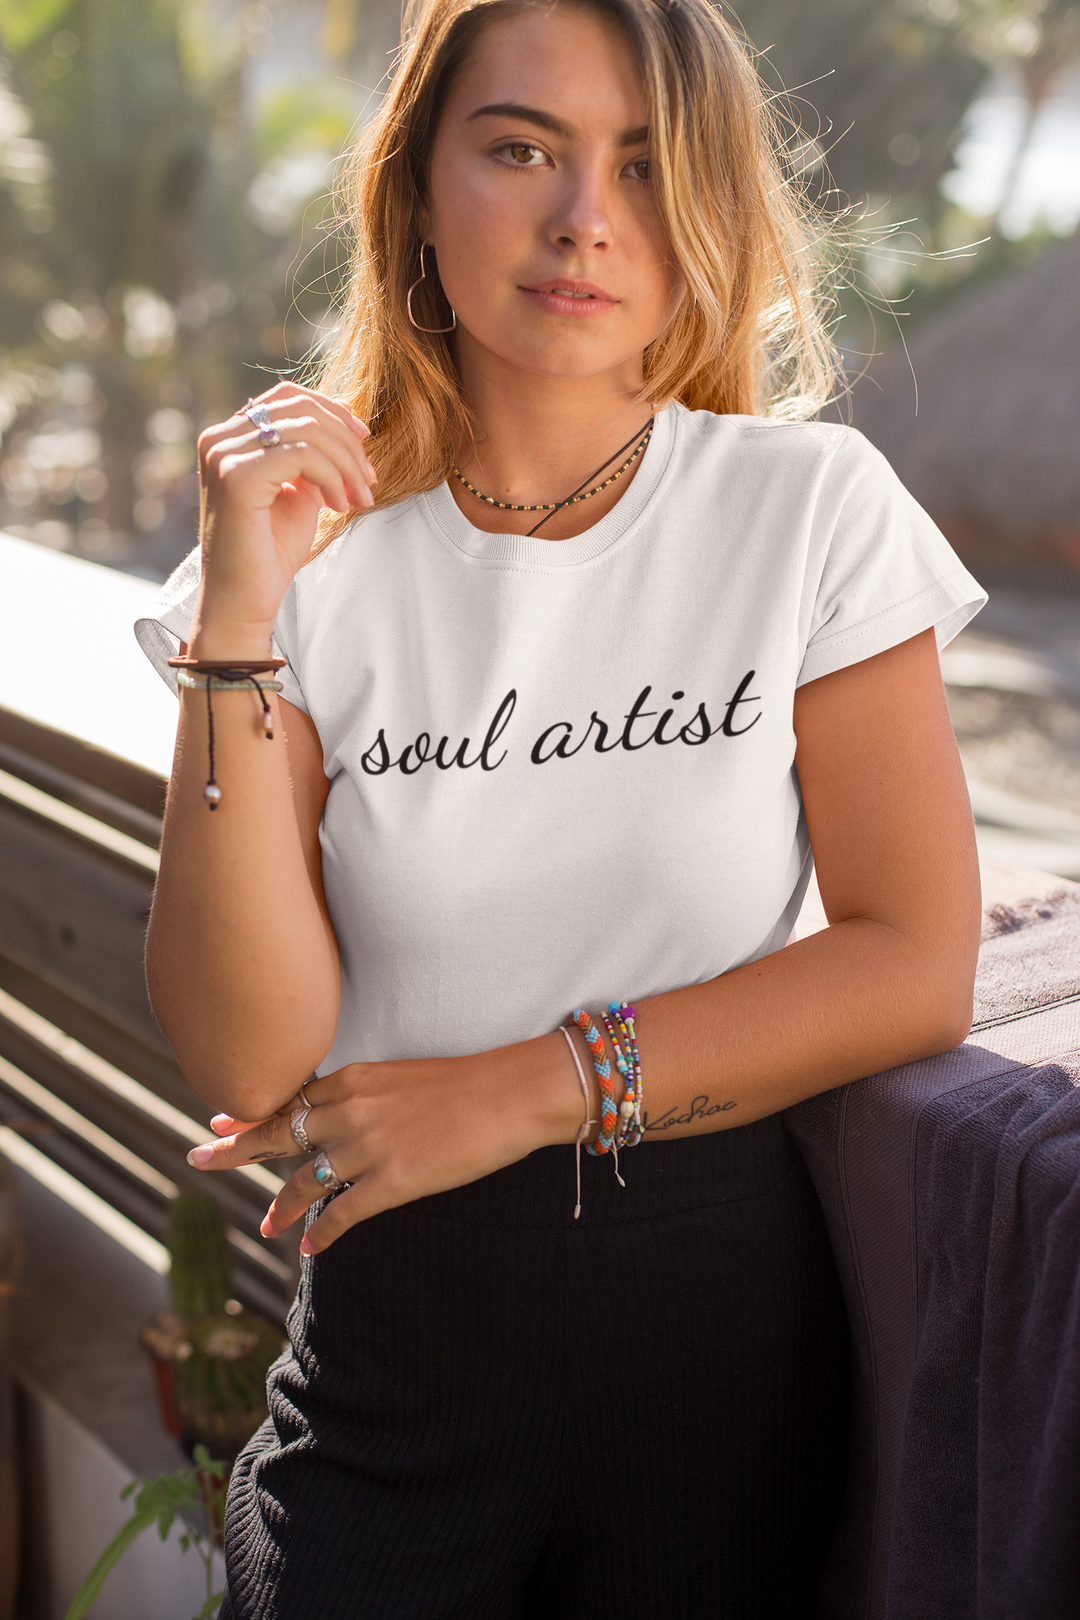 soul artist graphic t shirt black soul artist on white t shirt being worn by young women in tropical setting